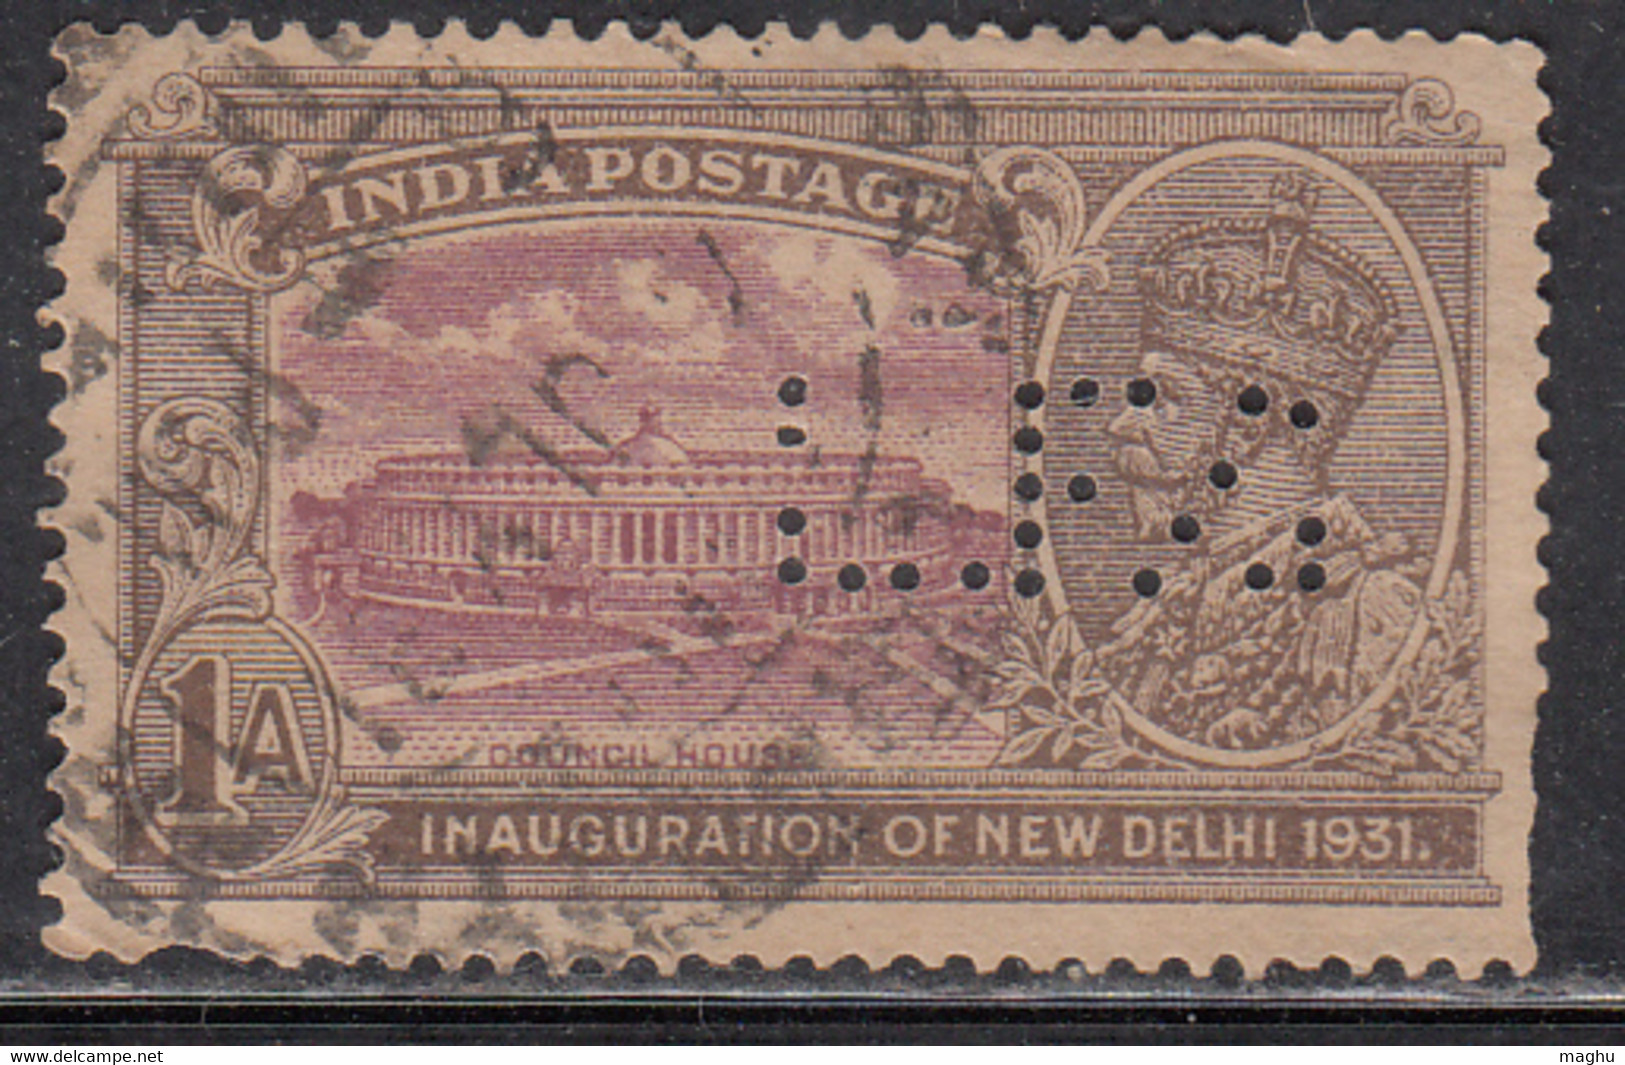 Perfin / Perfins  On 1a British India Used 1931 Inauguration - Perfins